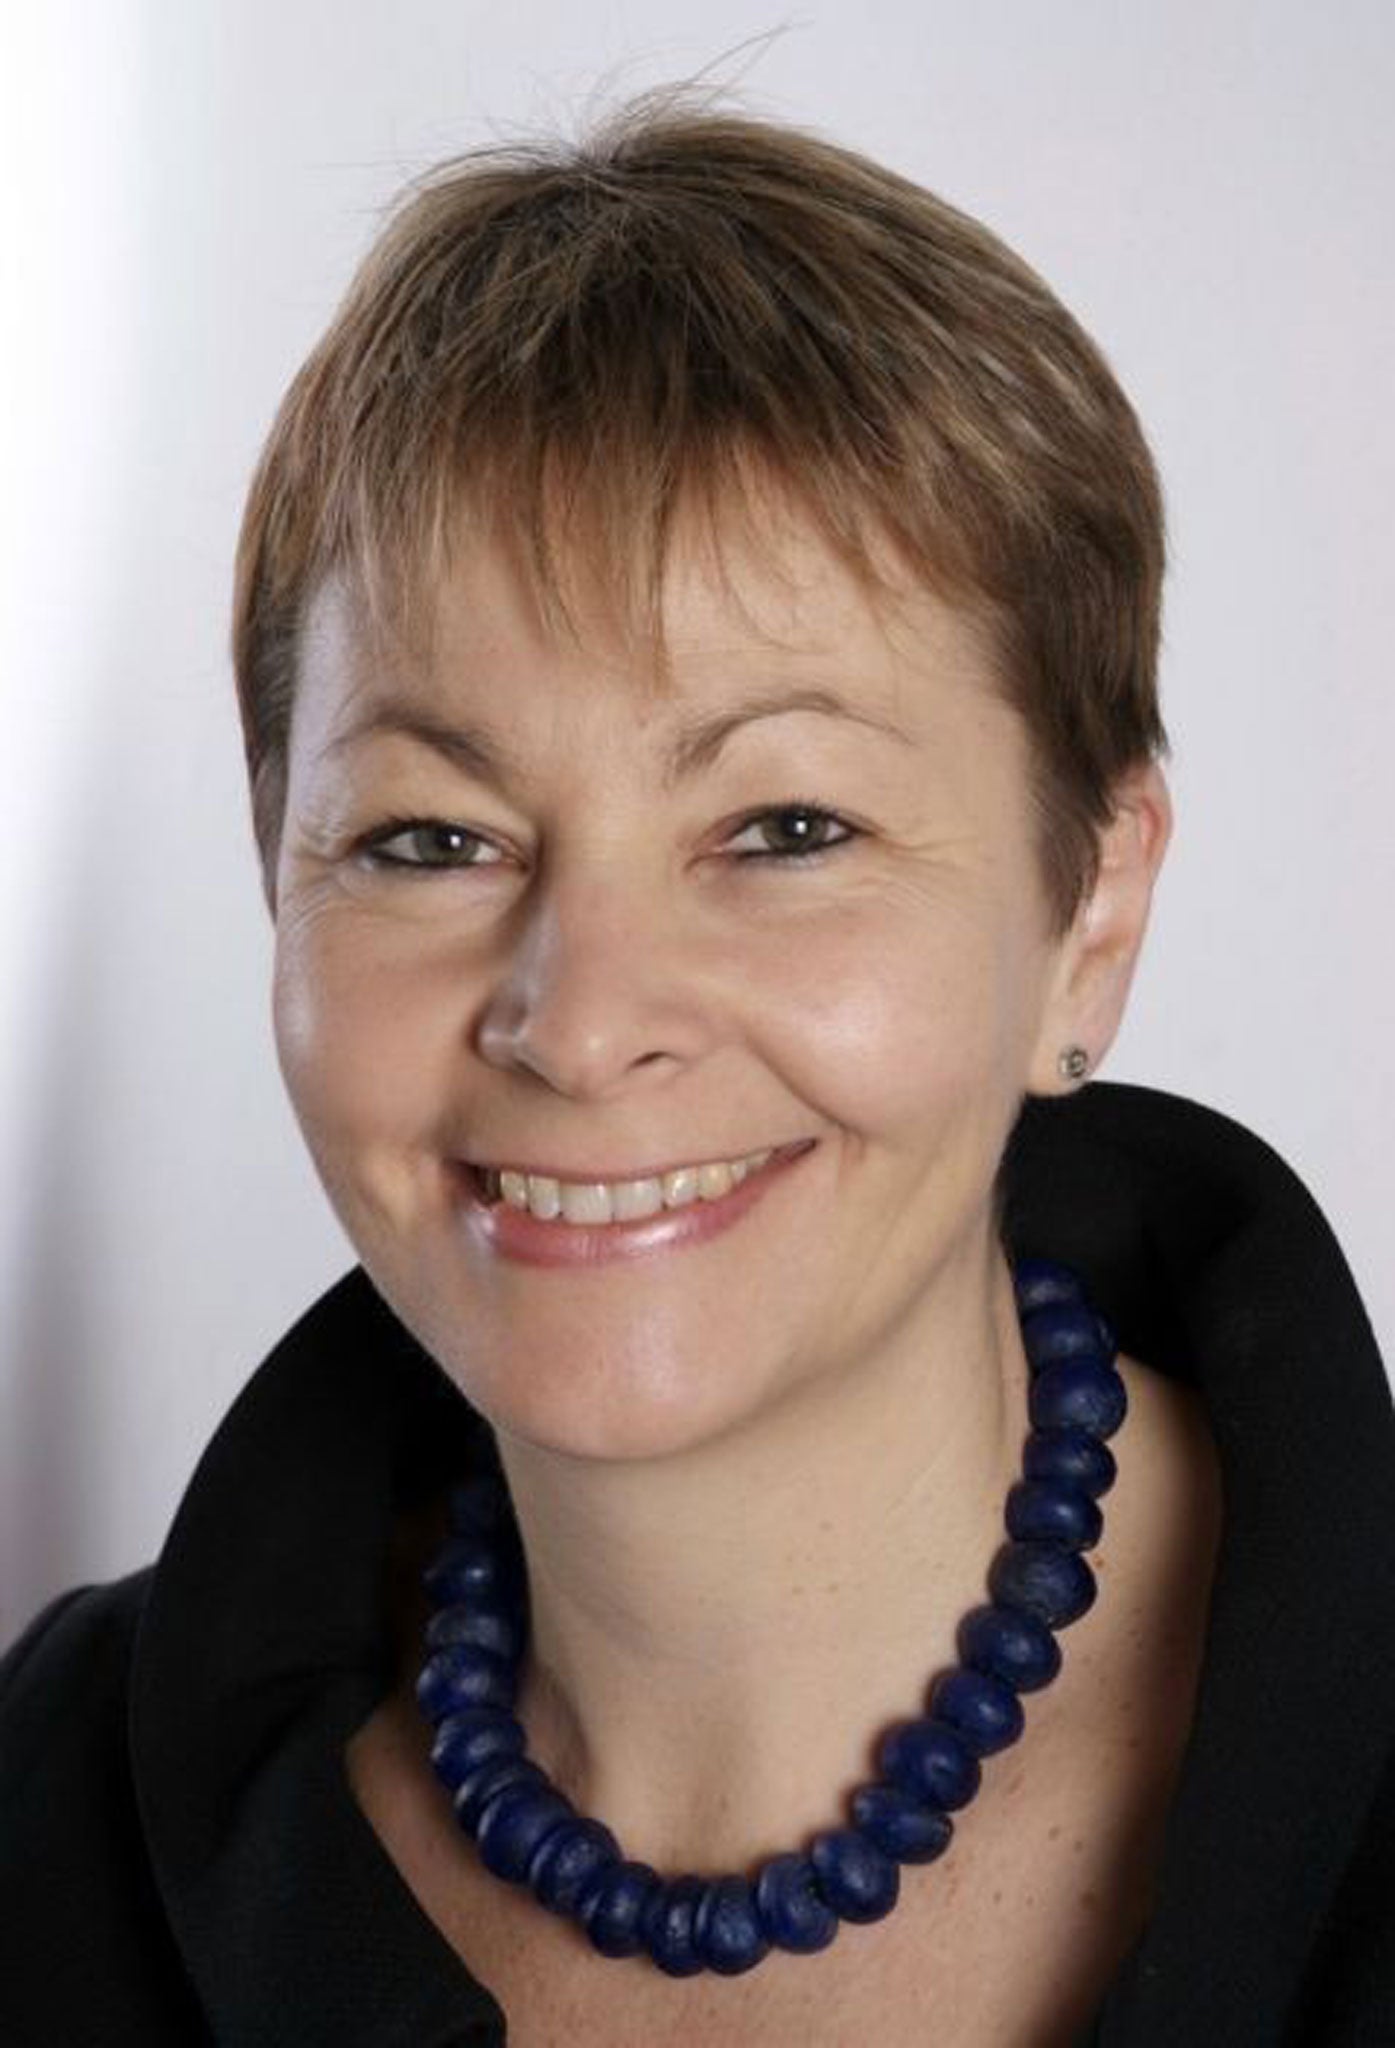 Caroline Lucas says thousands of women will be doubly disadvantaged by the new Bill